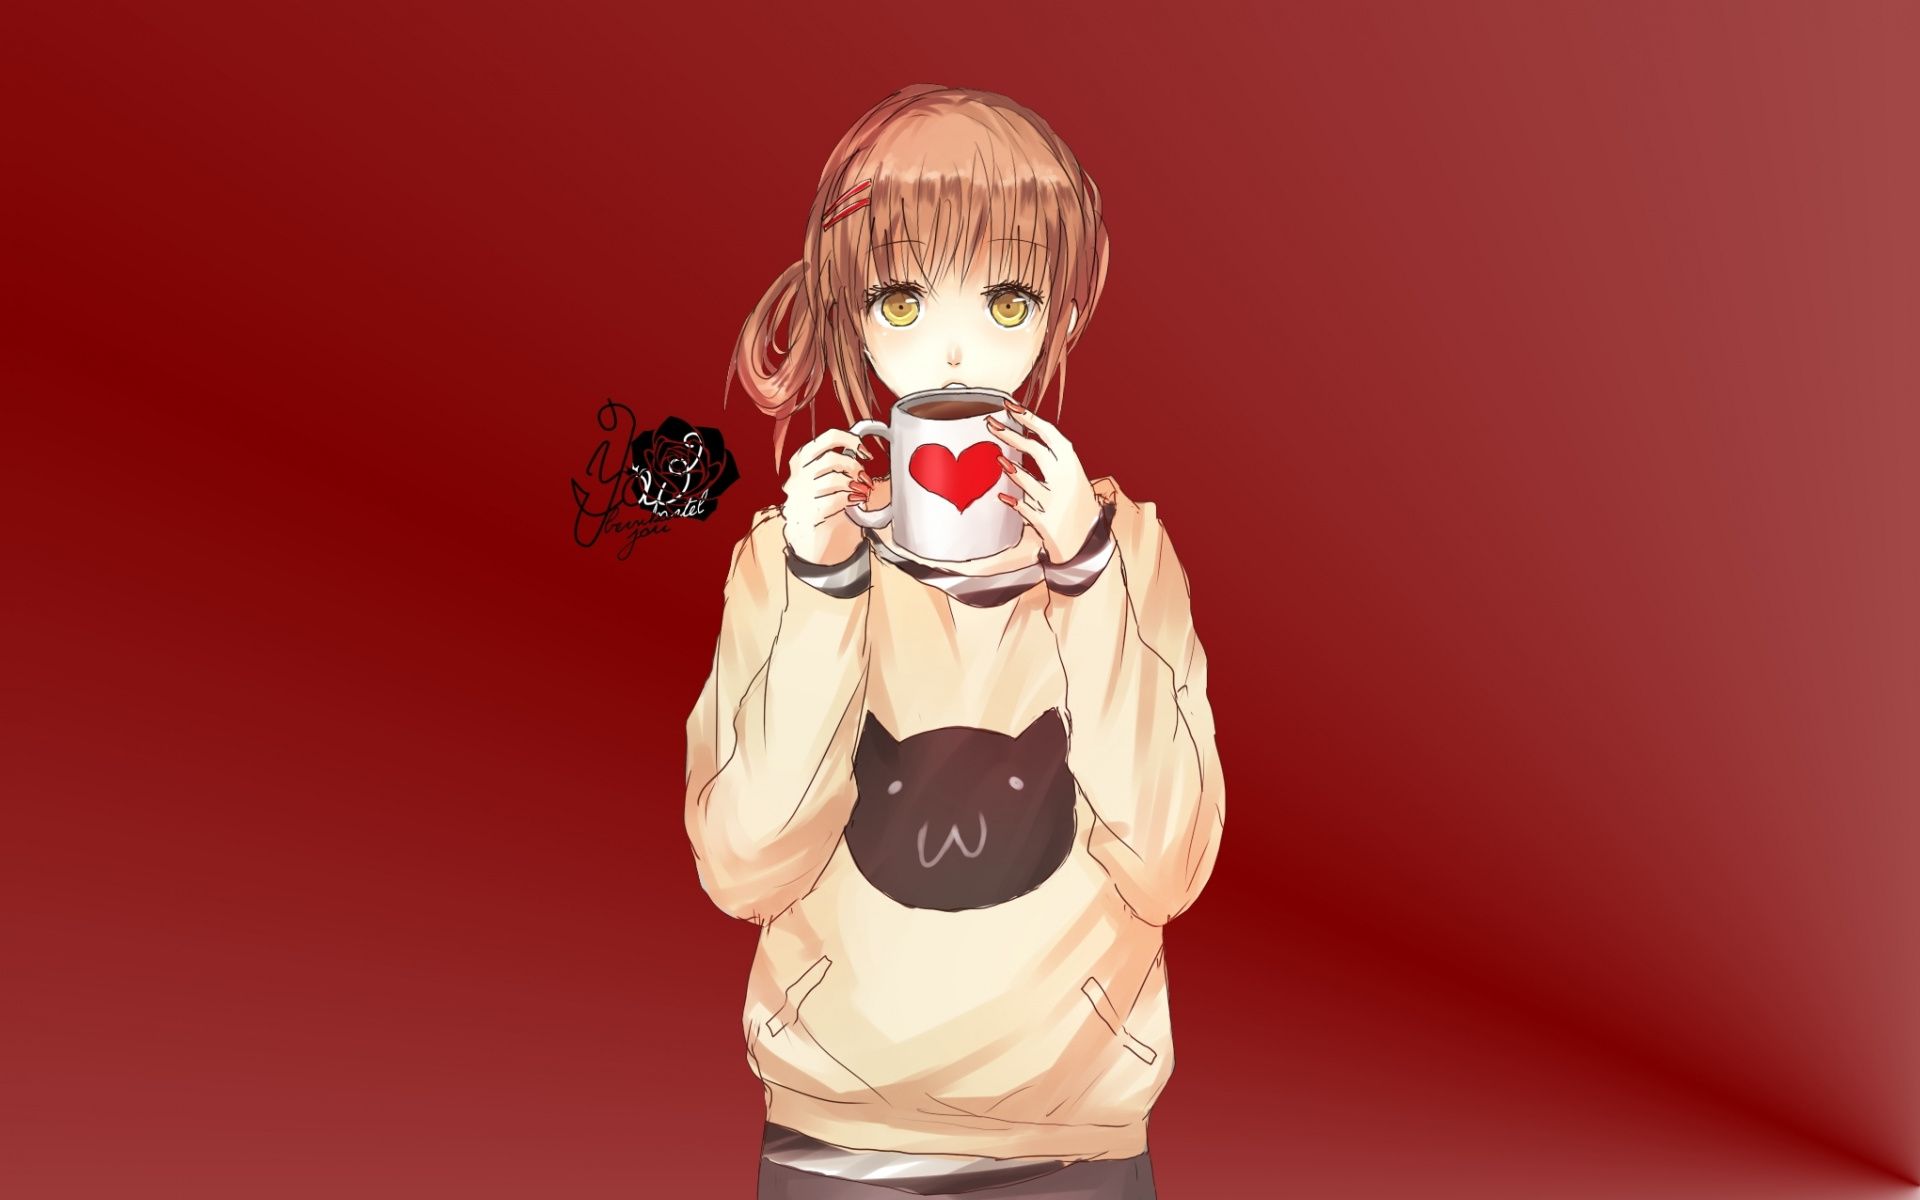 Download Curious, anime girl, coffee cup wallpaper, 1920x1200